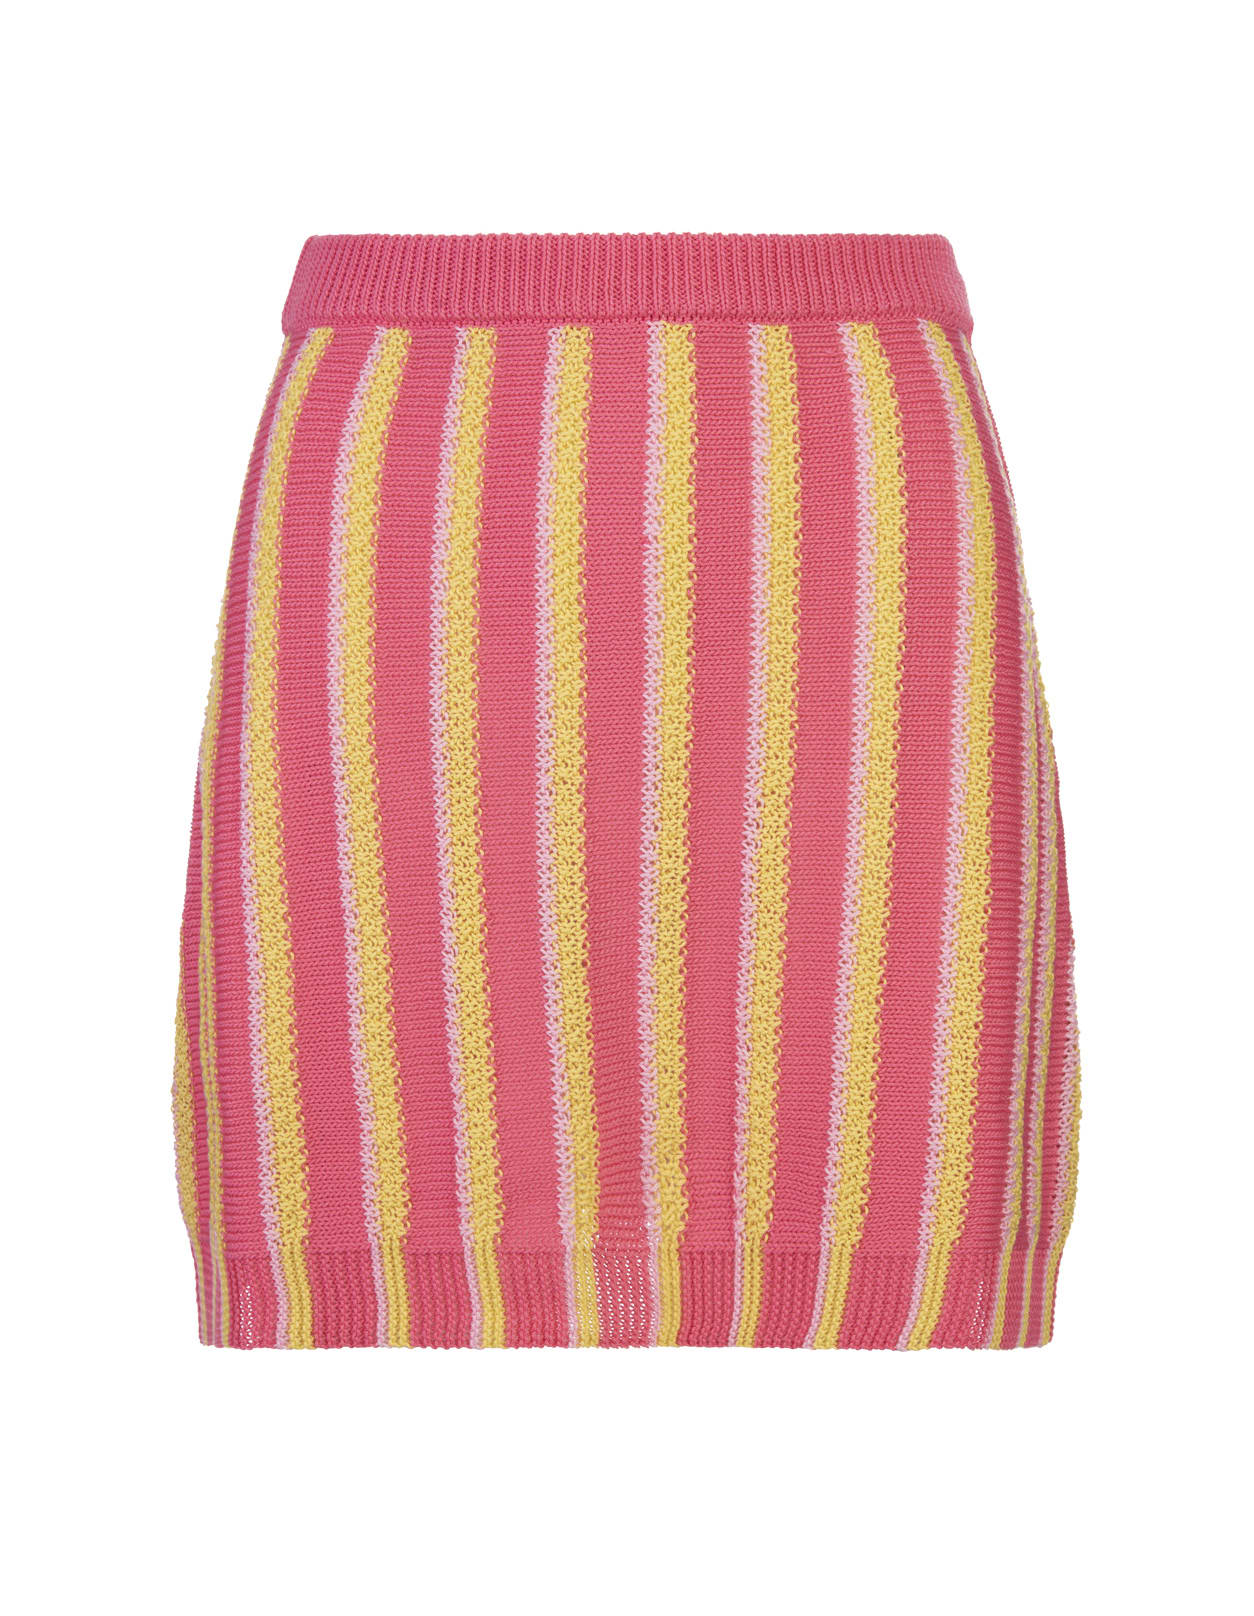 Pink, Yellow And White Striped Knitted Mini Skirt